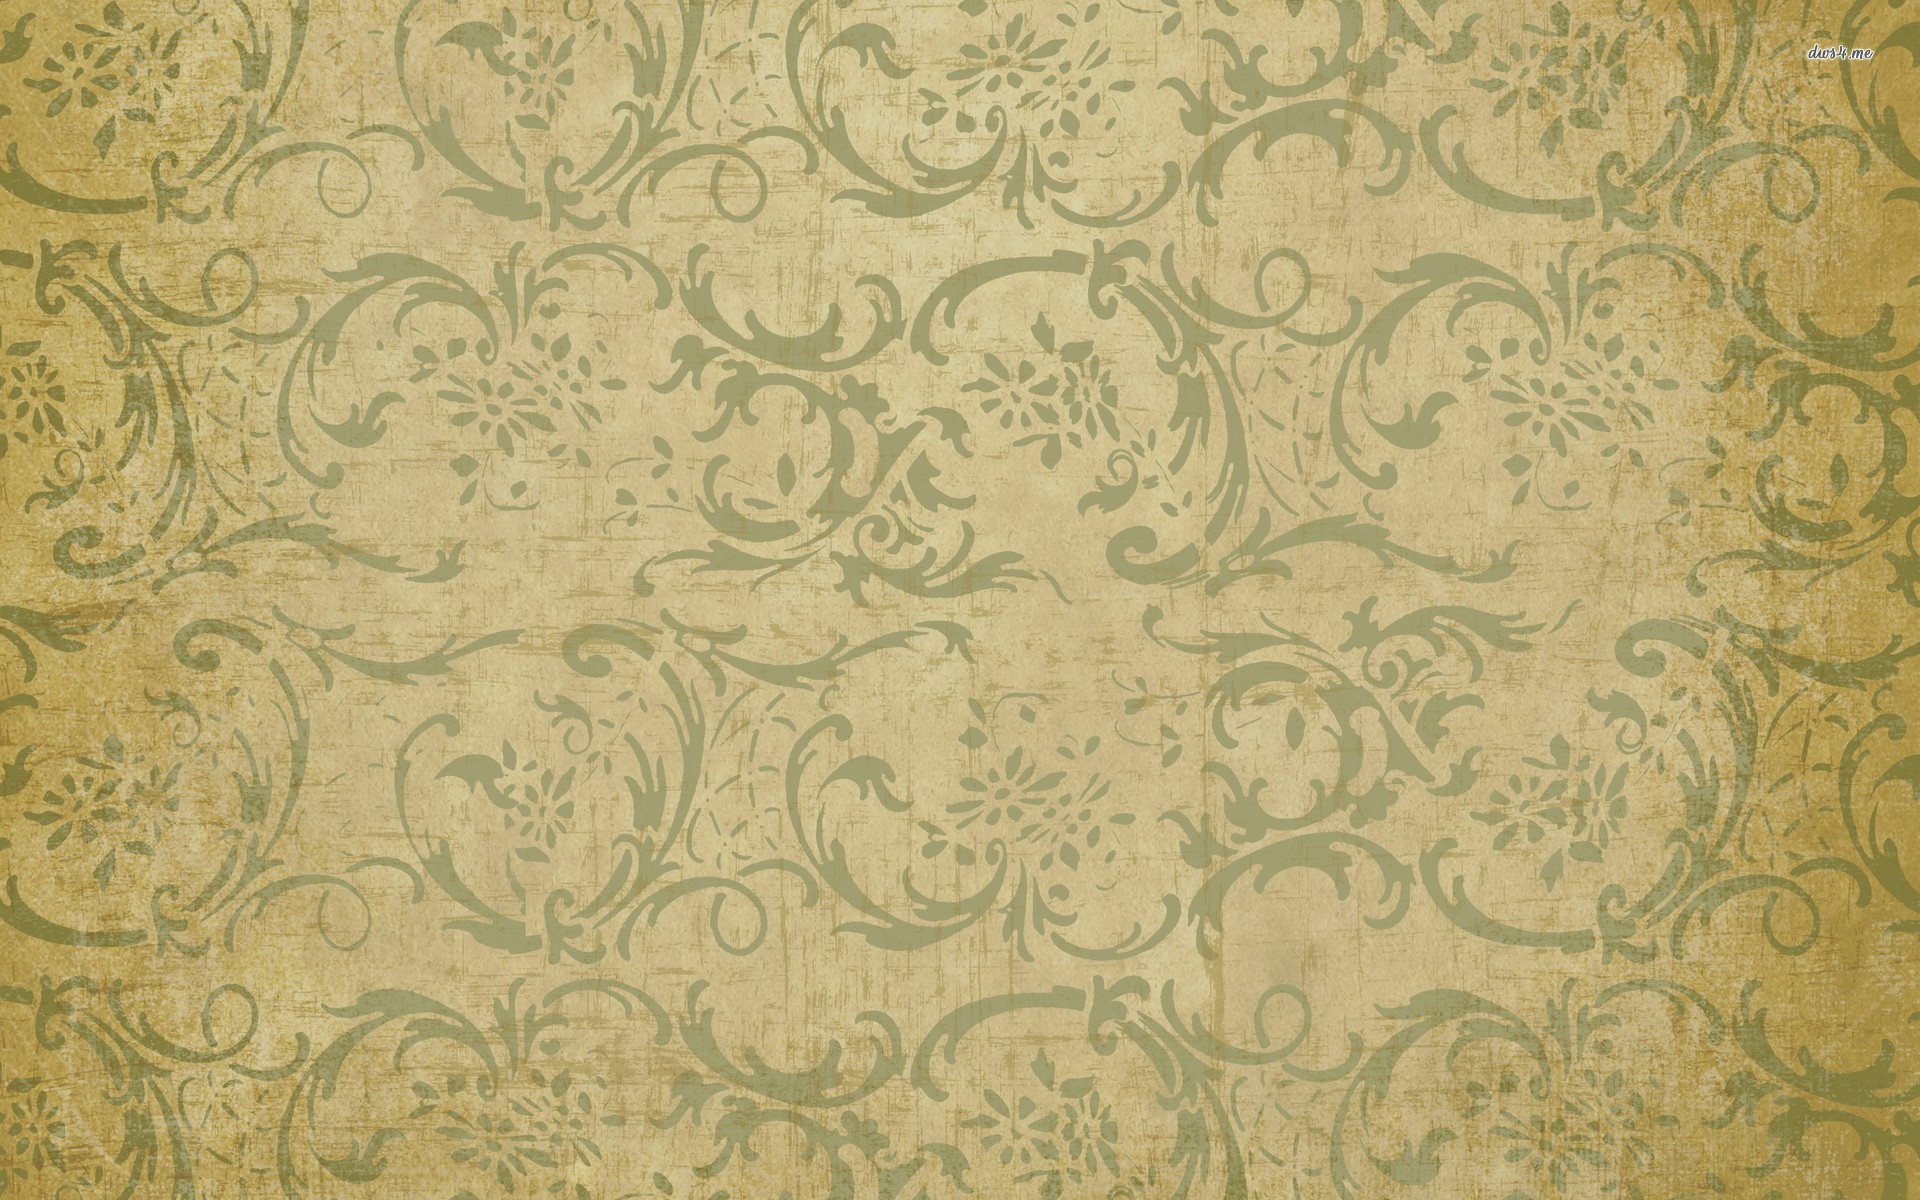 Swirly Vintage Pattern Wallpaper Abstract